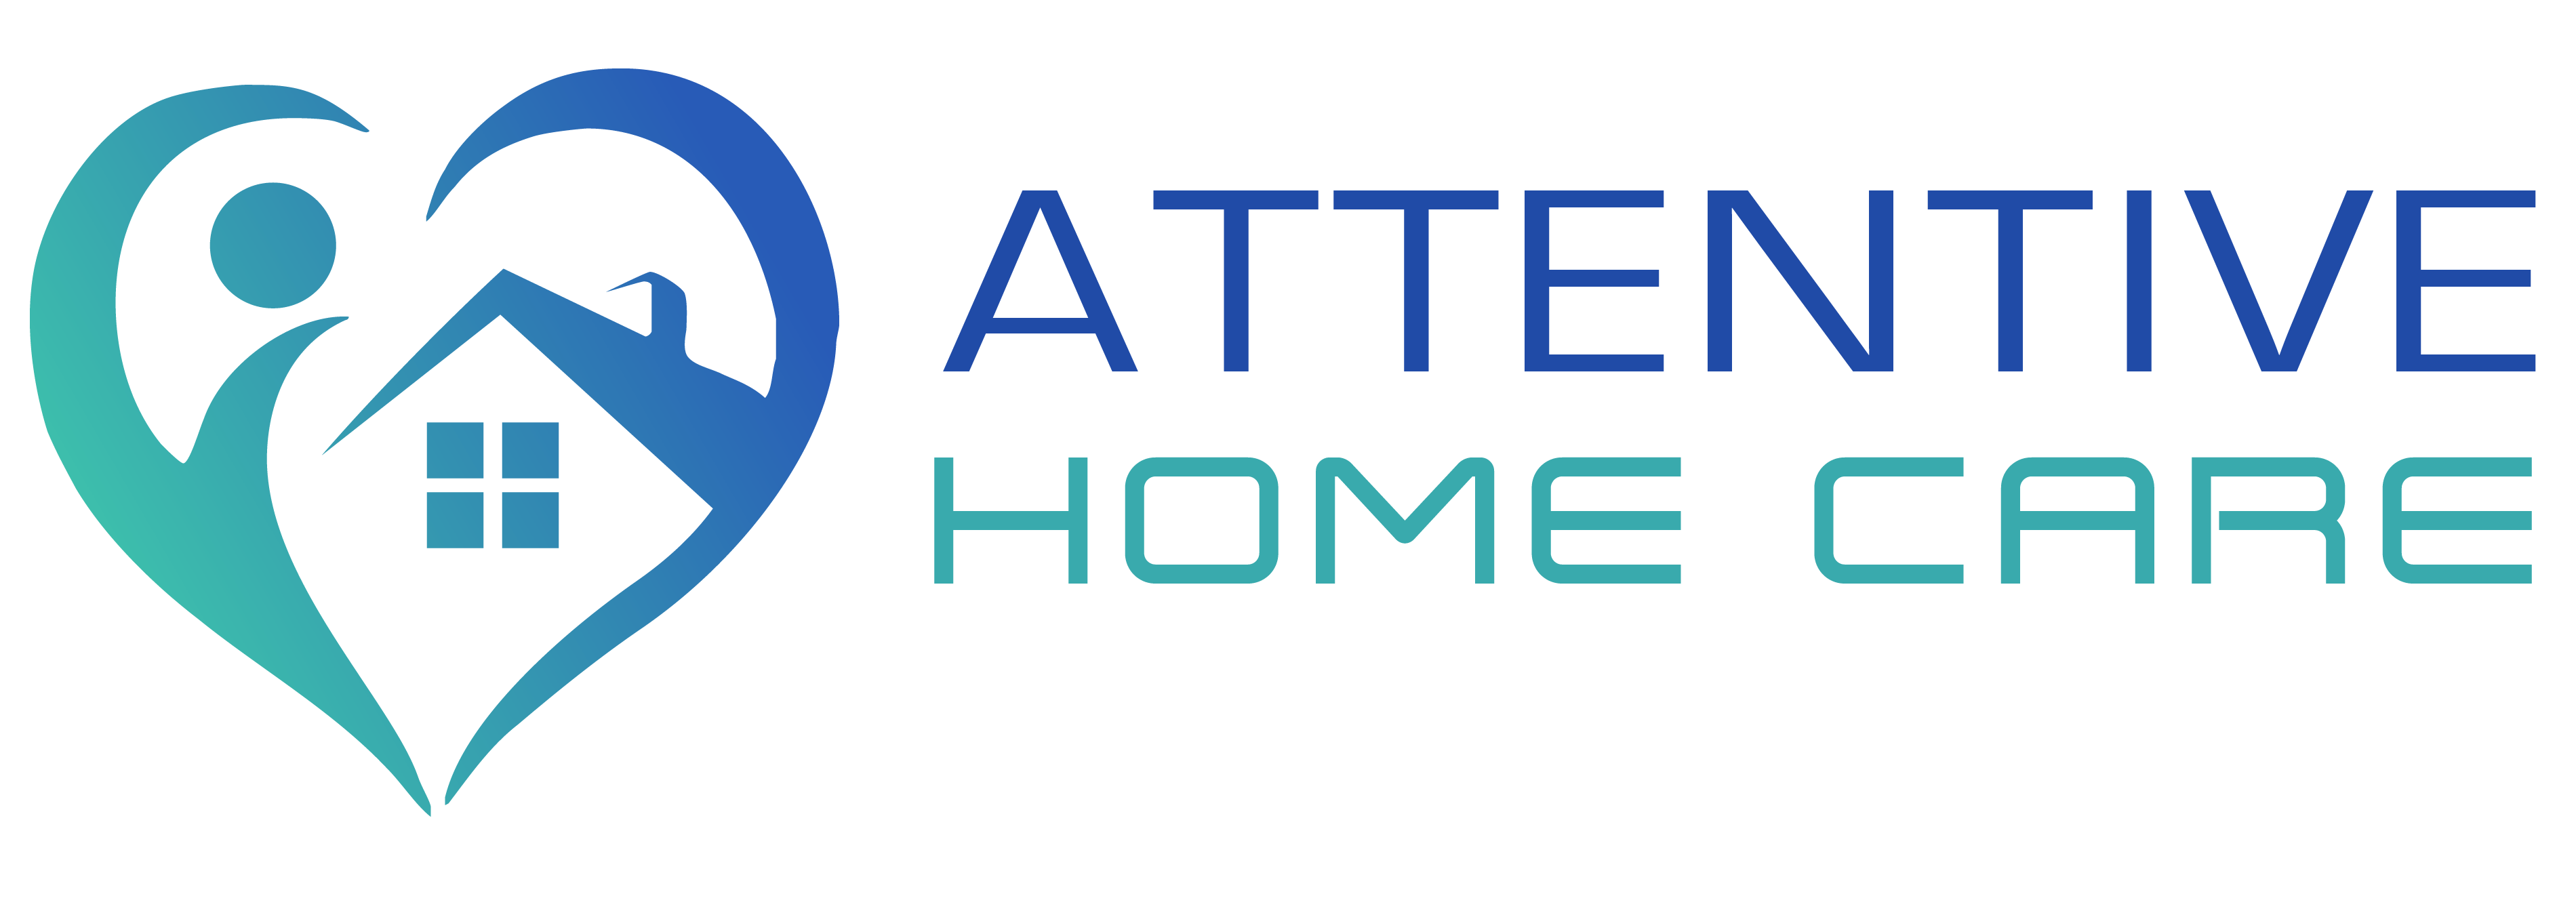 Attentive Home Care - St Paul, MN